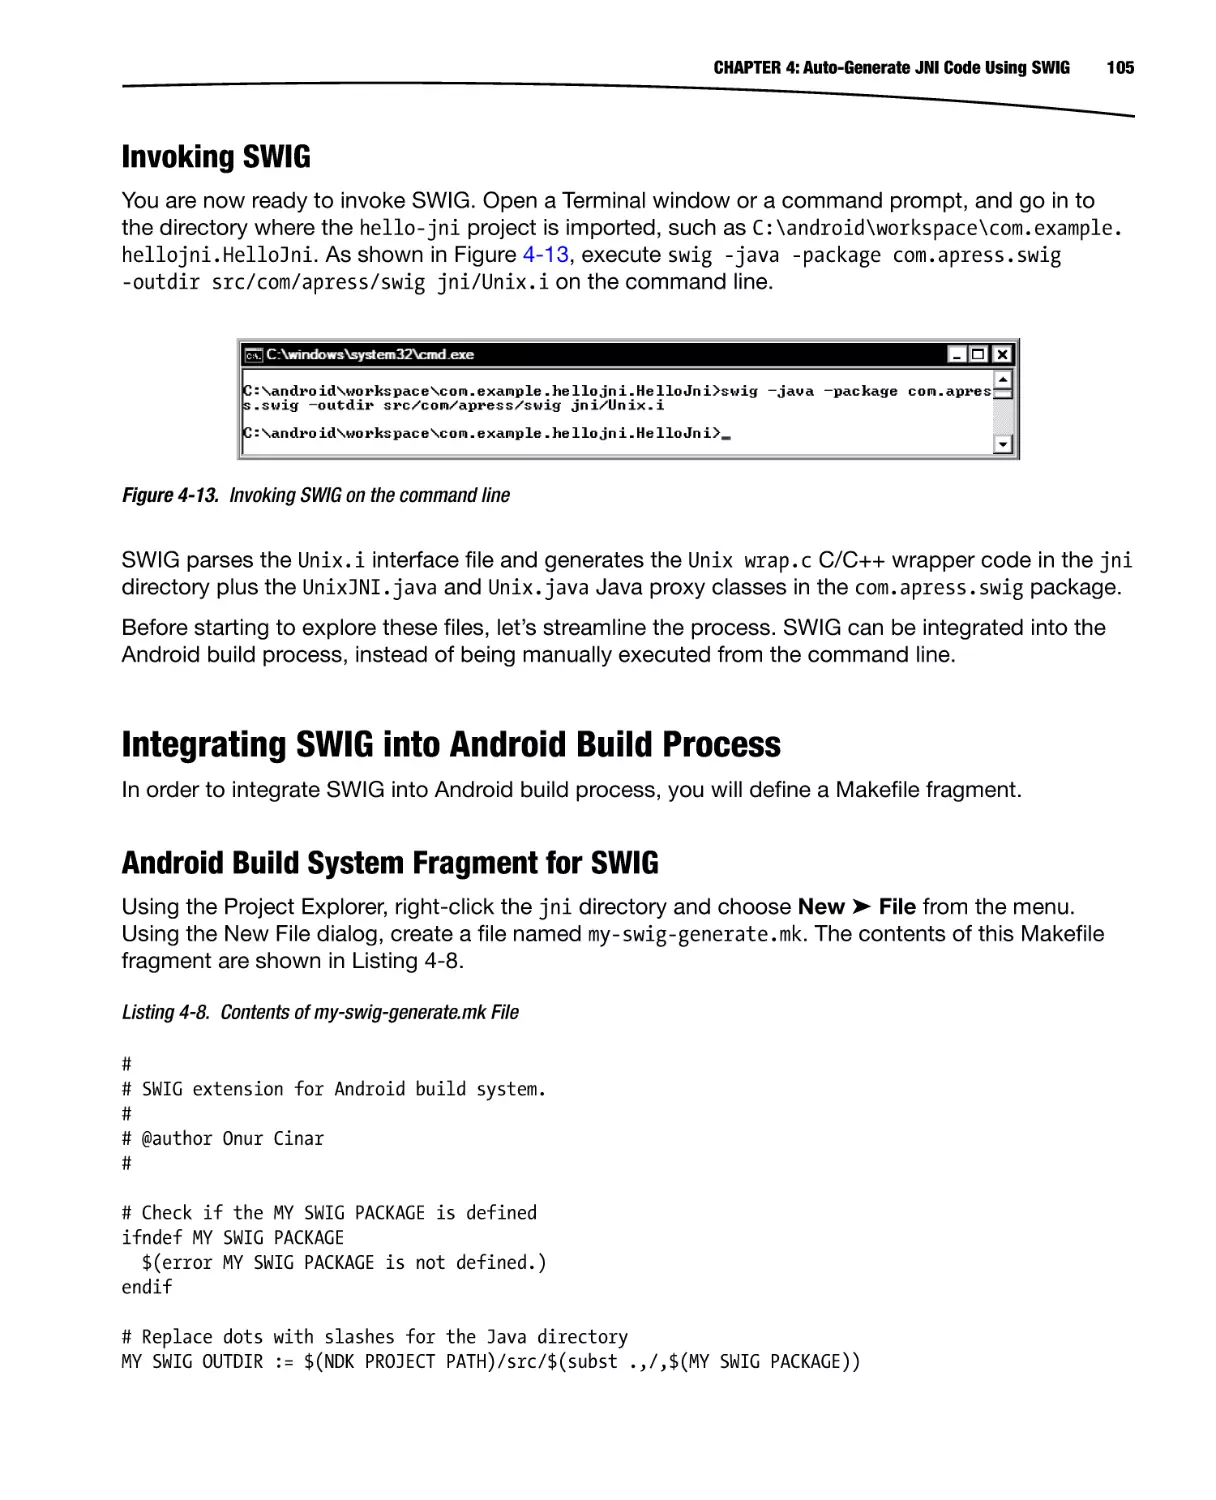 Invoking SWIG
Integrating SWIG into Android Build Process
Android Build System Fragment for SWIG